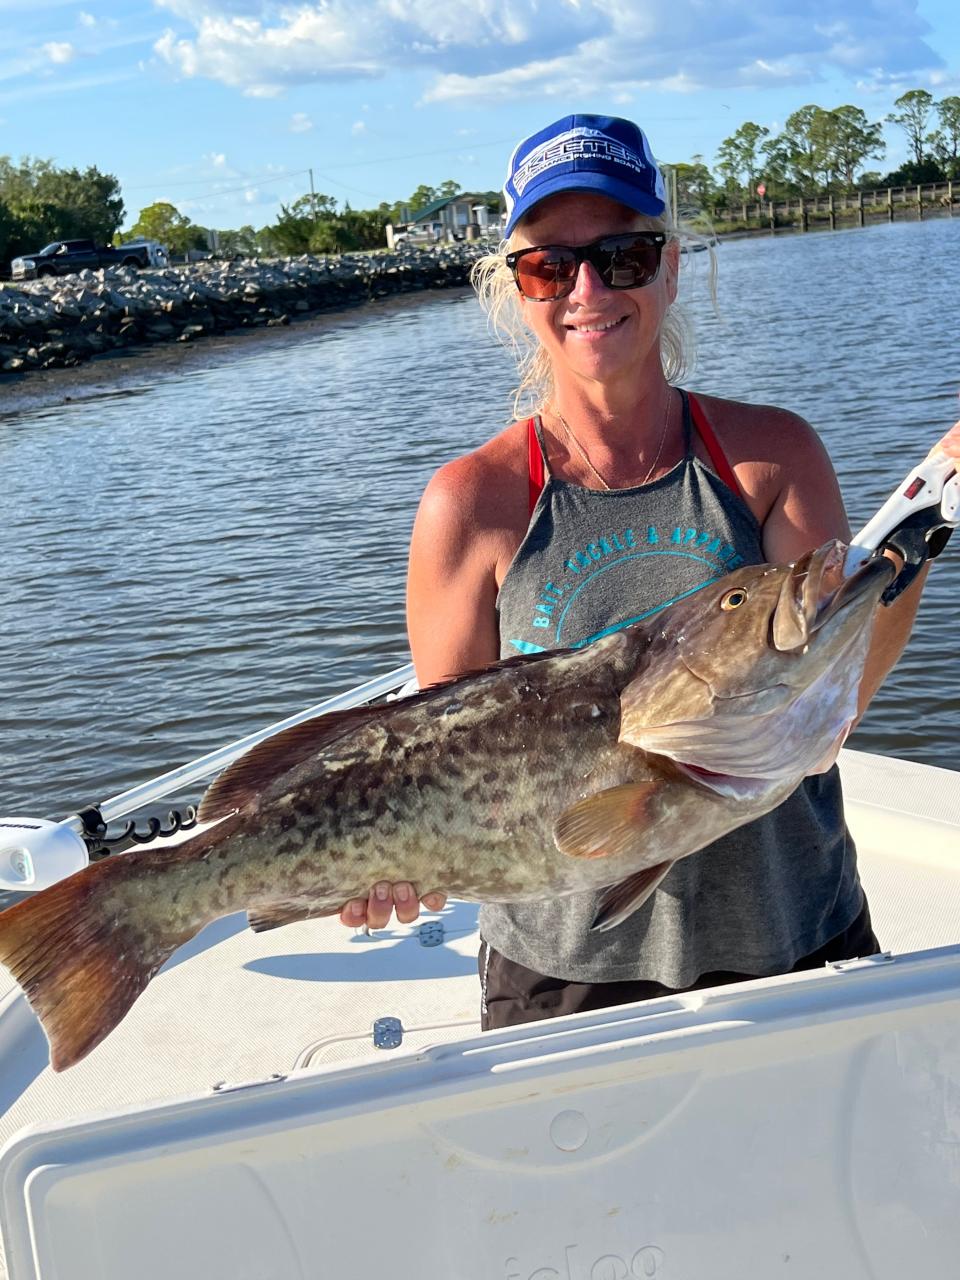 Julie Happersett holds her personal best 32” gag grouper, caught this past week while fishing 65’ of water. “Almost pulled me in” she said.